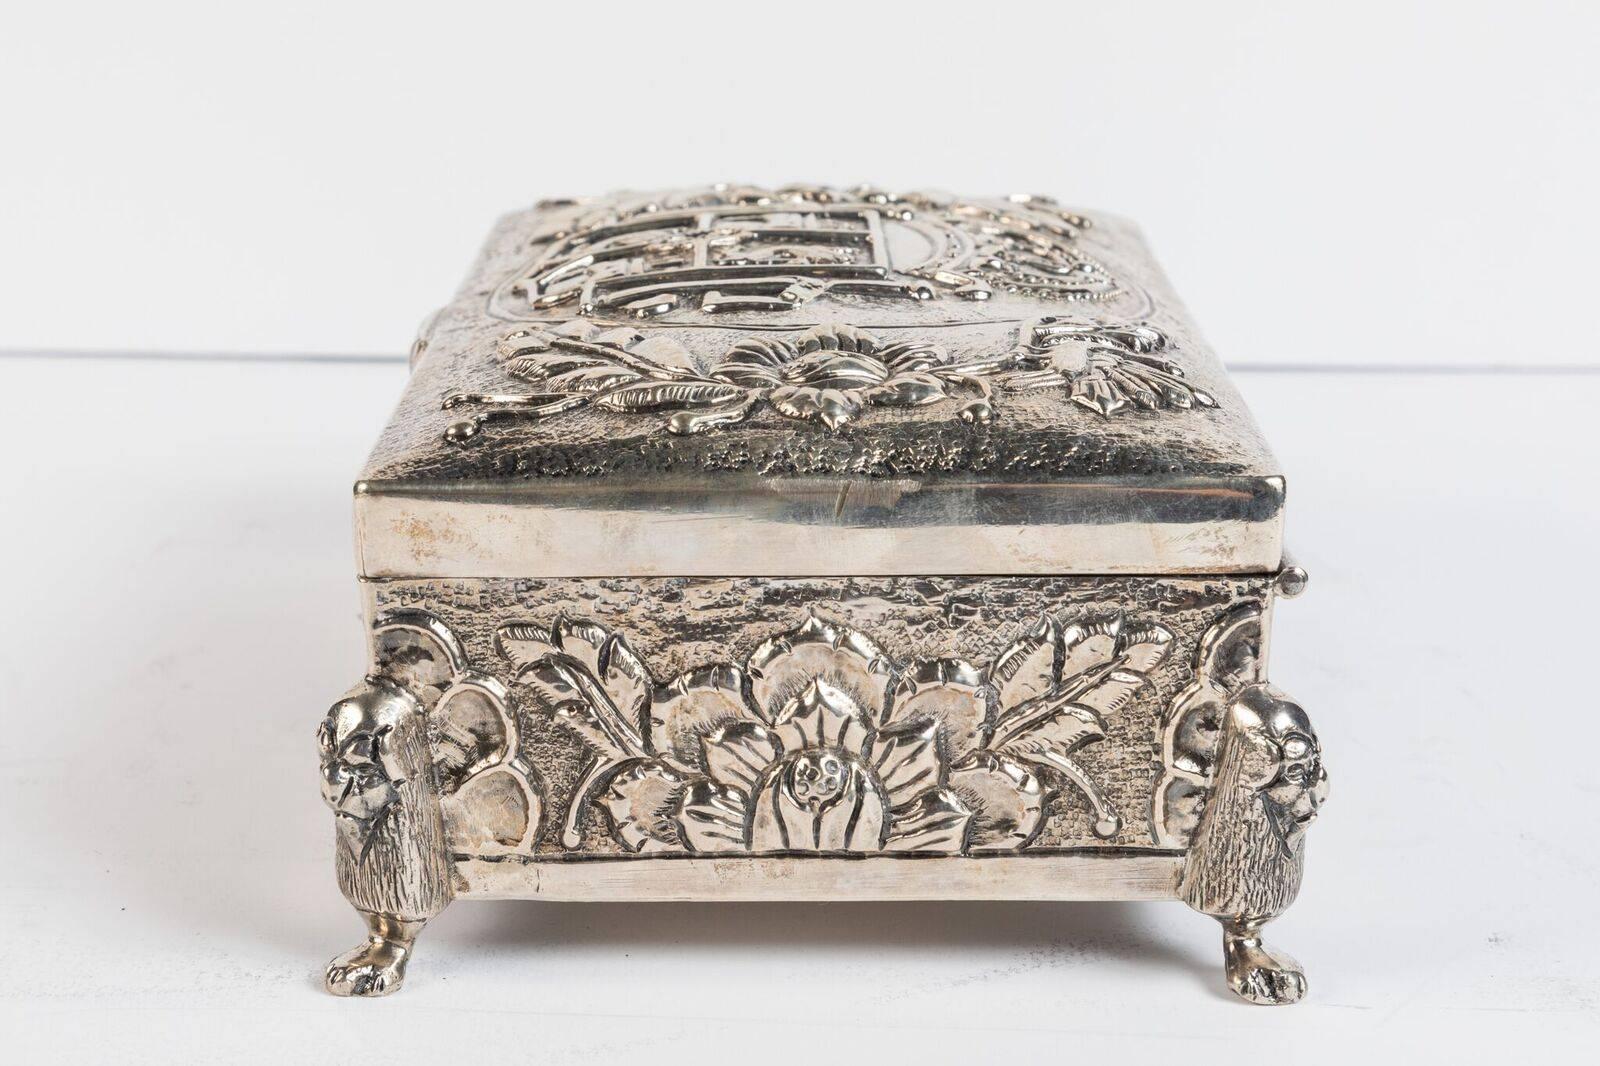 Dramatic, richly embellished, silver-plated, hinge-top box featuring the ancient Coat of Arms for the Spanish kingdom of Castile and Leon. The whole atop lion-form feet.